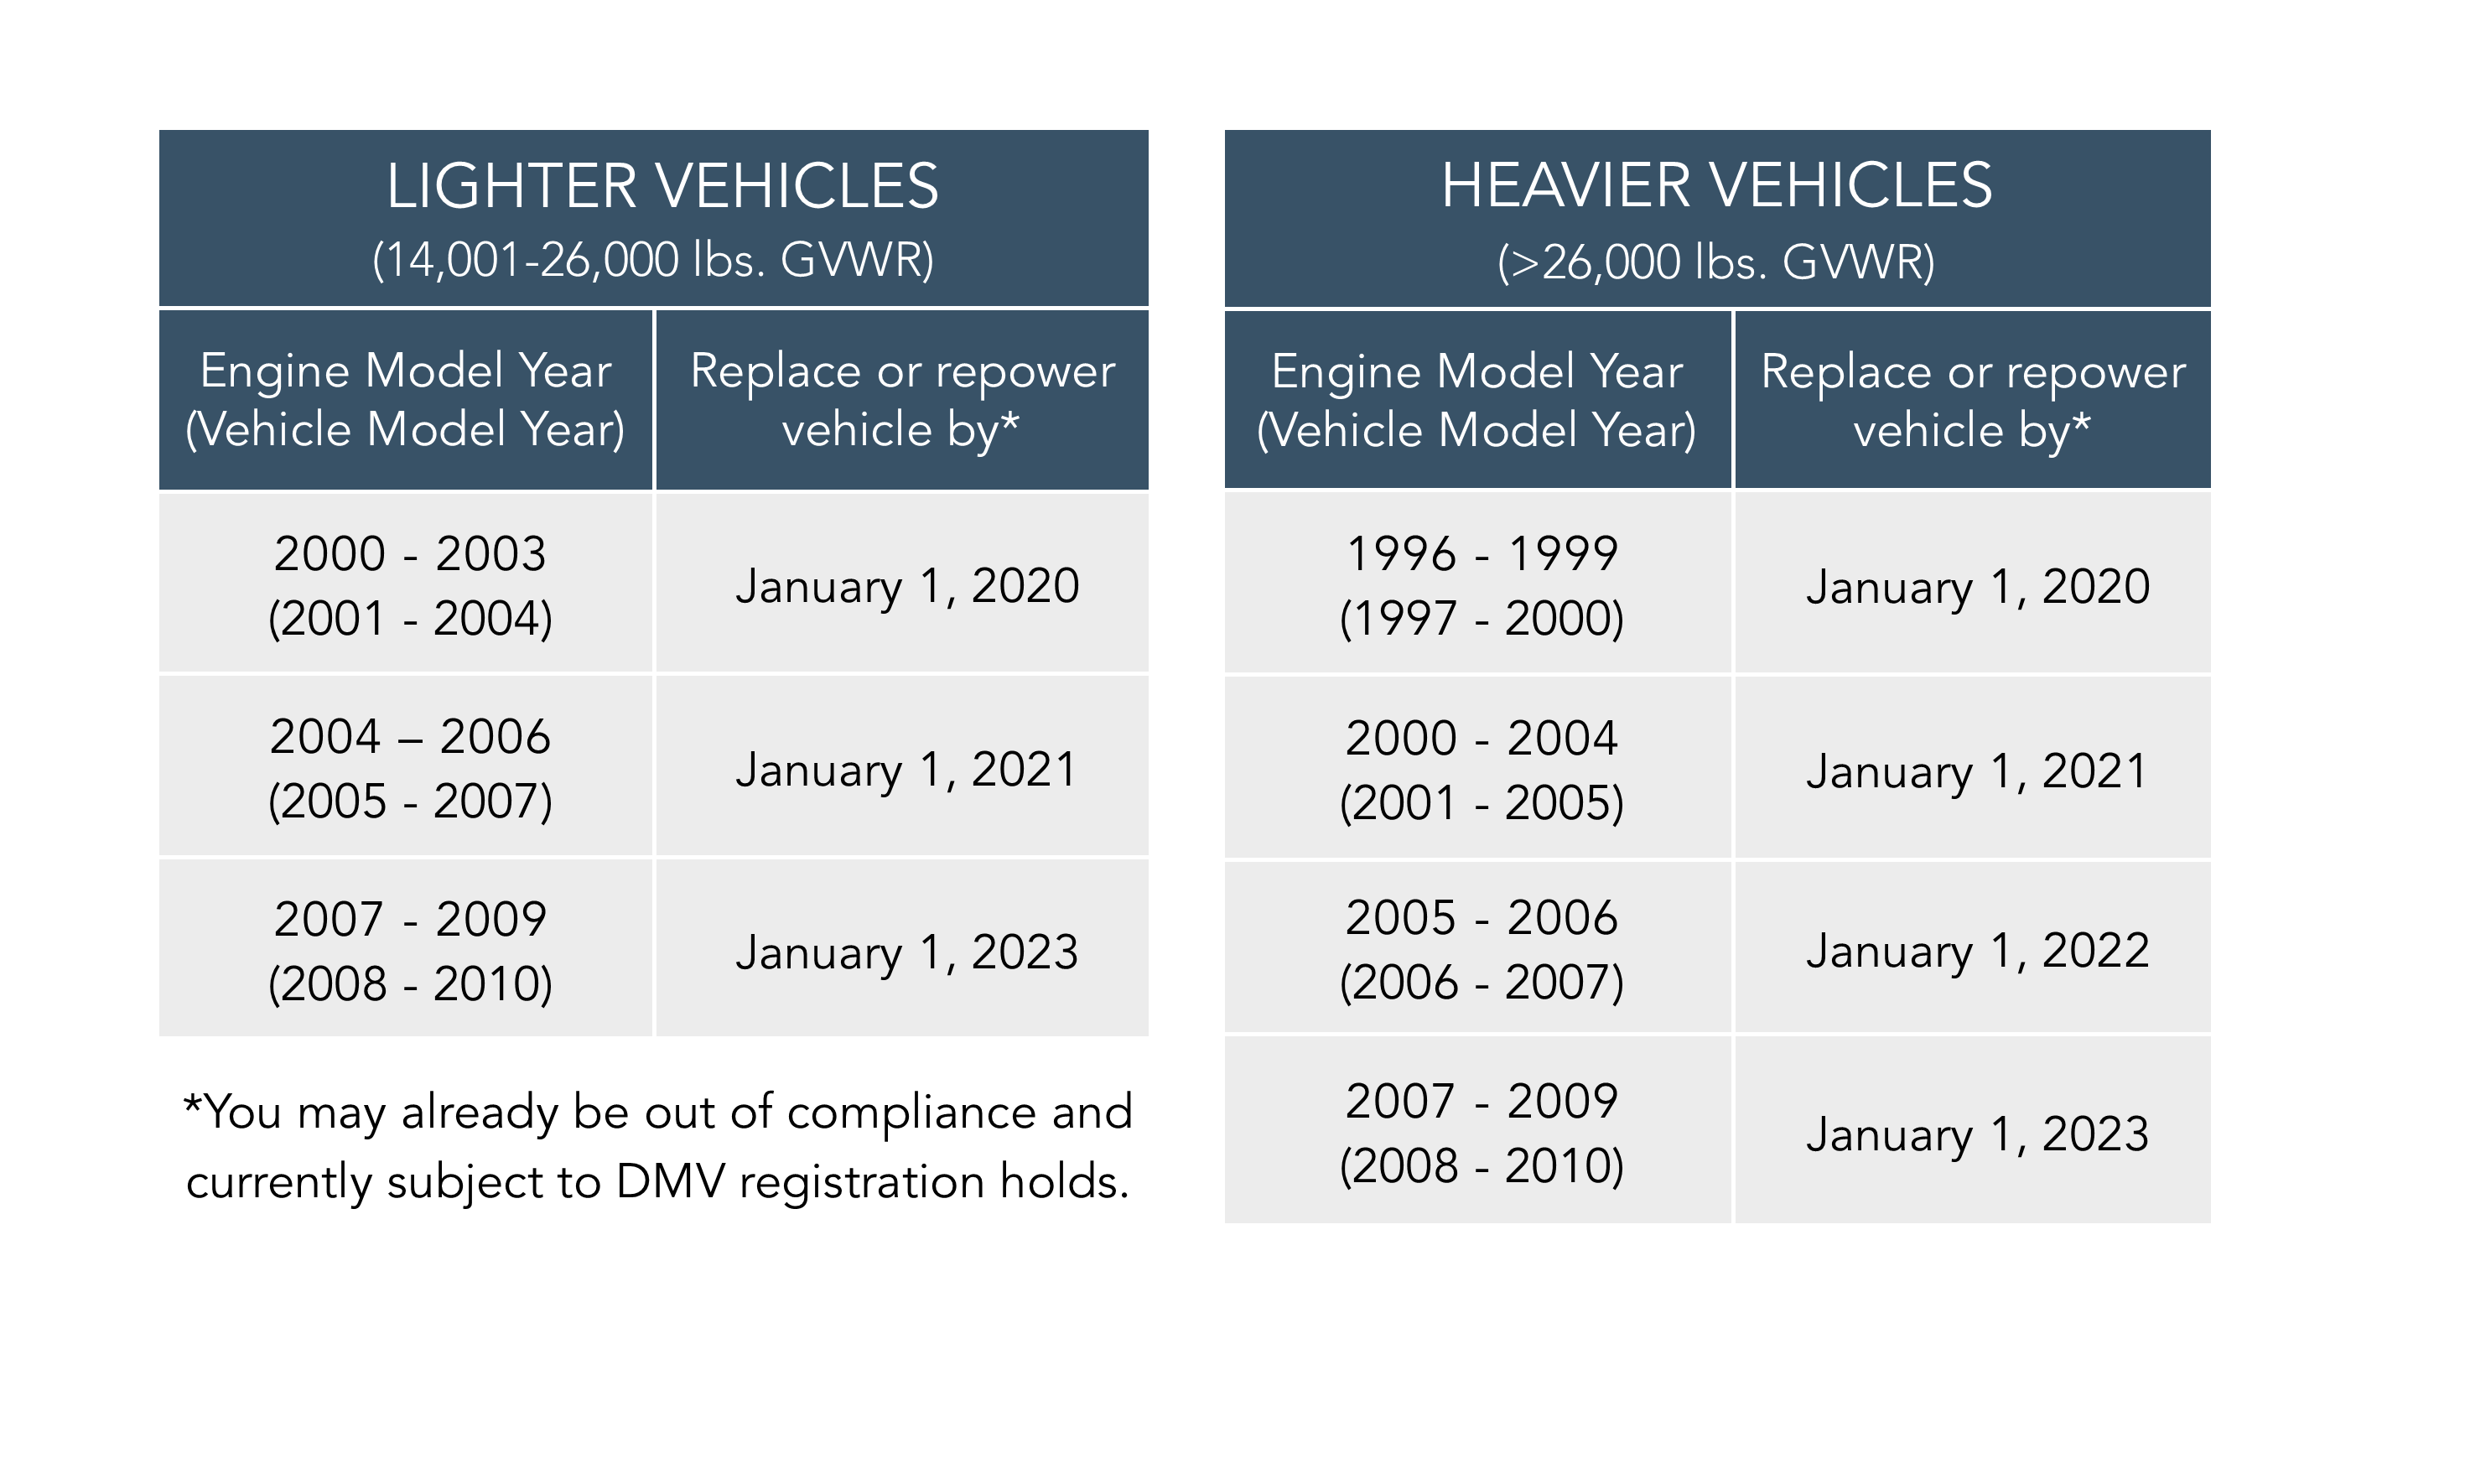 Lighter vehicles between 14,001 and 26,000lbs GVWR: 1995 and older model year engines need to be replaced or repowered by 1/1/15. 1996 model year engines need to be replaced or repowered by 1/1/16. 1997 and older model year engines need to be replaced or repowered by 1/1/17. 1999 and older engines need to be replaced or repowered by 1/1/19. 2000-2003 model year engines need to be replaced or repowered by 1/1/20. 2004-2006 model year engines need to be replaced or repowered by 1/1/21. 2007-2009 model year engines need to be replaced by 1/1/23. 
Heavy vehicles above 26,000lbs GVWR: 1993 and older model year engines need no particulate matter filter, but require repower or replacement by 1/1/15. 1994-1995 model year engines require no particulate filter, but require repower or replacement by 1/1/16. 1996-1999 model year engines required a particulate matter filter by 1/1/12, and will require a repower or replacement by 1/1/20. 2000-2004 model year engines required a particulate matter filter by 1/1/13, and require a repower or replacement by 1/1/21. 2005-2006 model year engines required a particulate matter filter by 1/1/14, and will require a repower or replacement by 1/1/22. 2007-2009 model year engines required a particulate matter filter by 1/1/14 if not allready manufacturer-equipped, and require repower or replacement by 1/1/23.